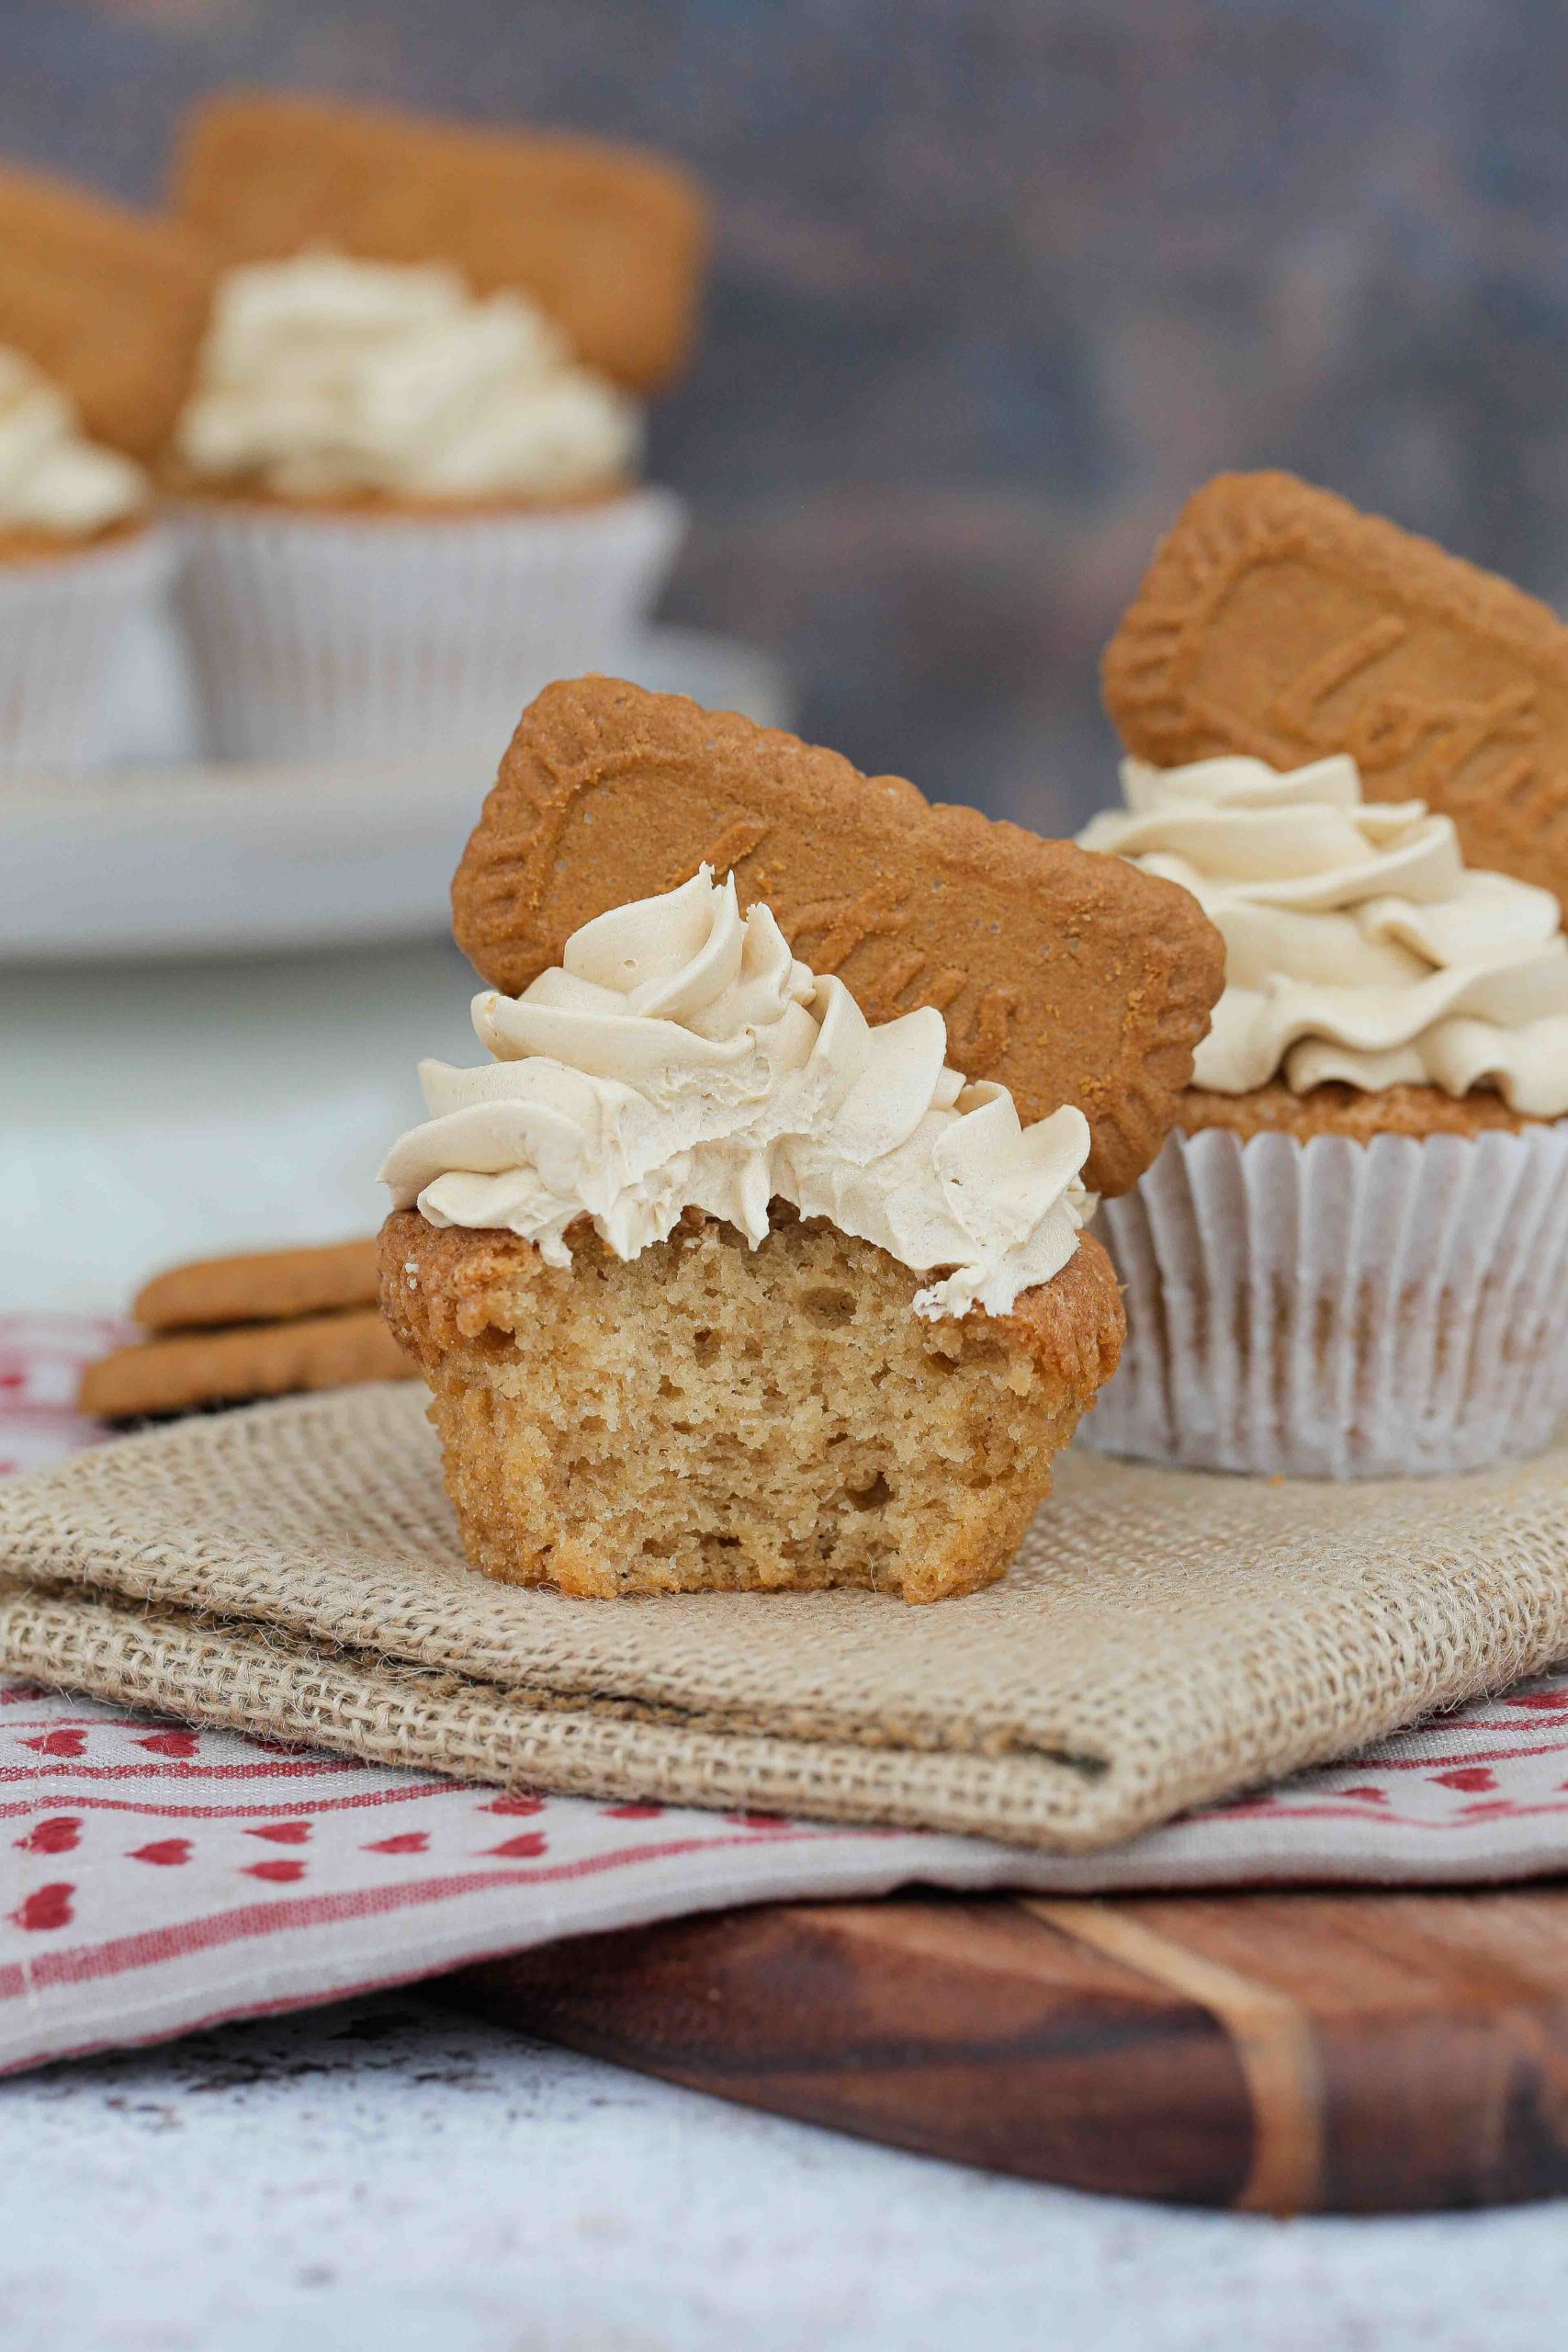 These vegan Biscoff Cupcakes with Biscoff Buttercream Frosting are a spiced cookie butter lover’s dream! Soft and fluffy golden sugar cupcakes topped with whipped buttercream - the perfect afternoon treat! Recipe on thecookandhim.com | #biscoffcupcakes #vegancupcakes #buttercreamfrosting #veganbuttercream #biscoffspread #lotusbiscoff #biscoff